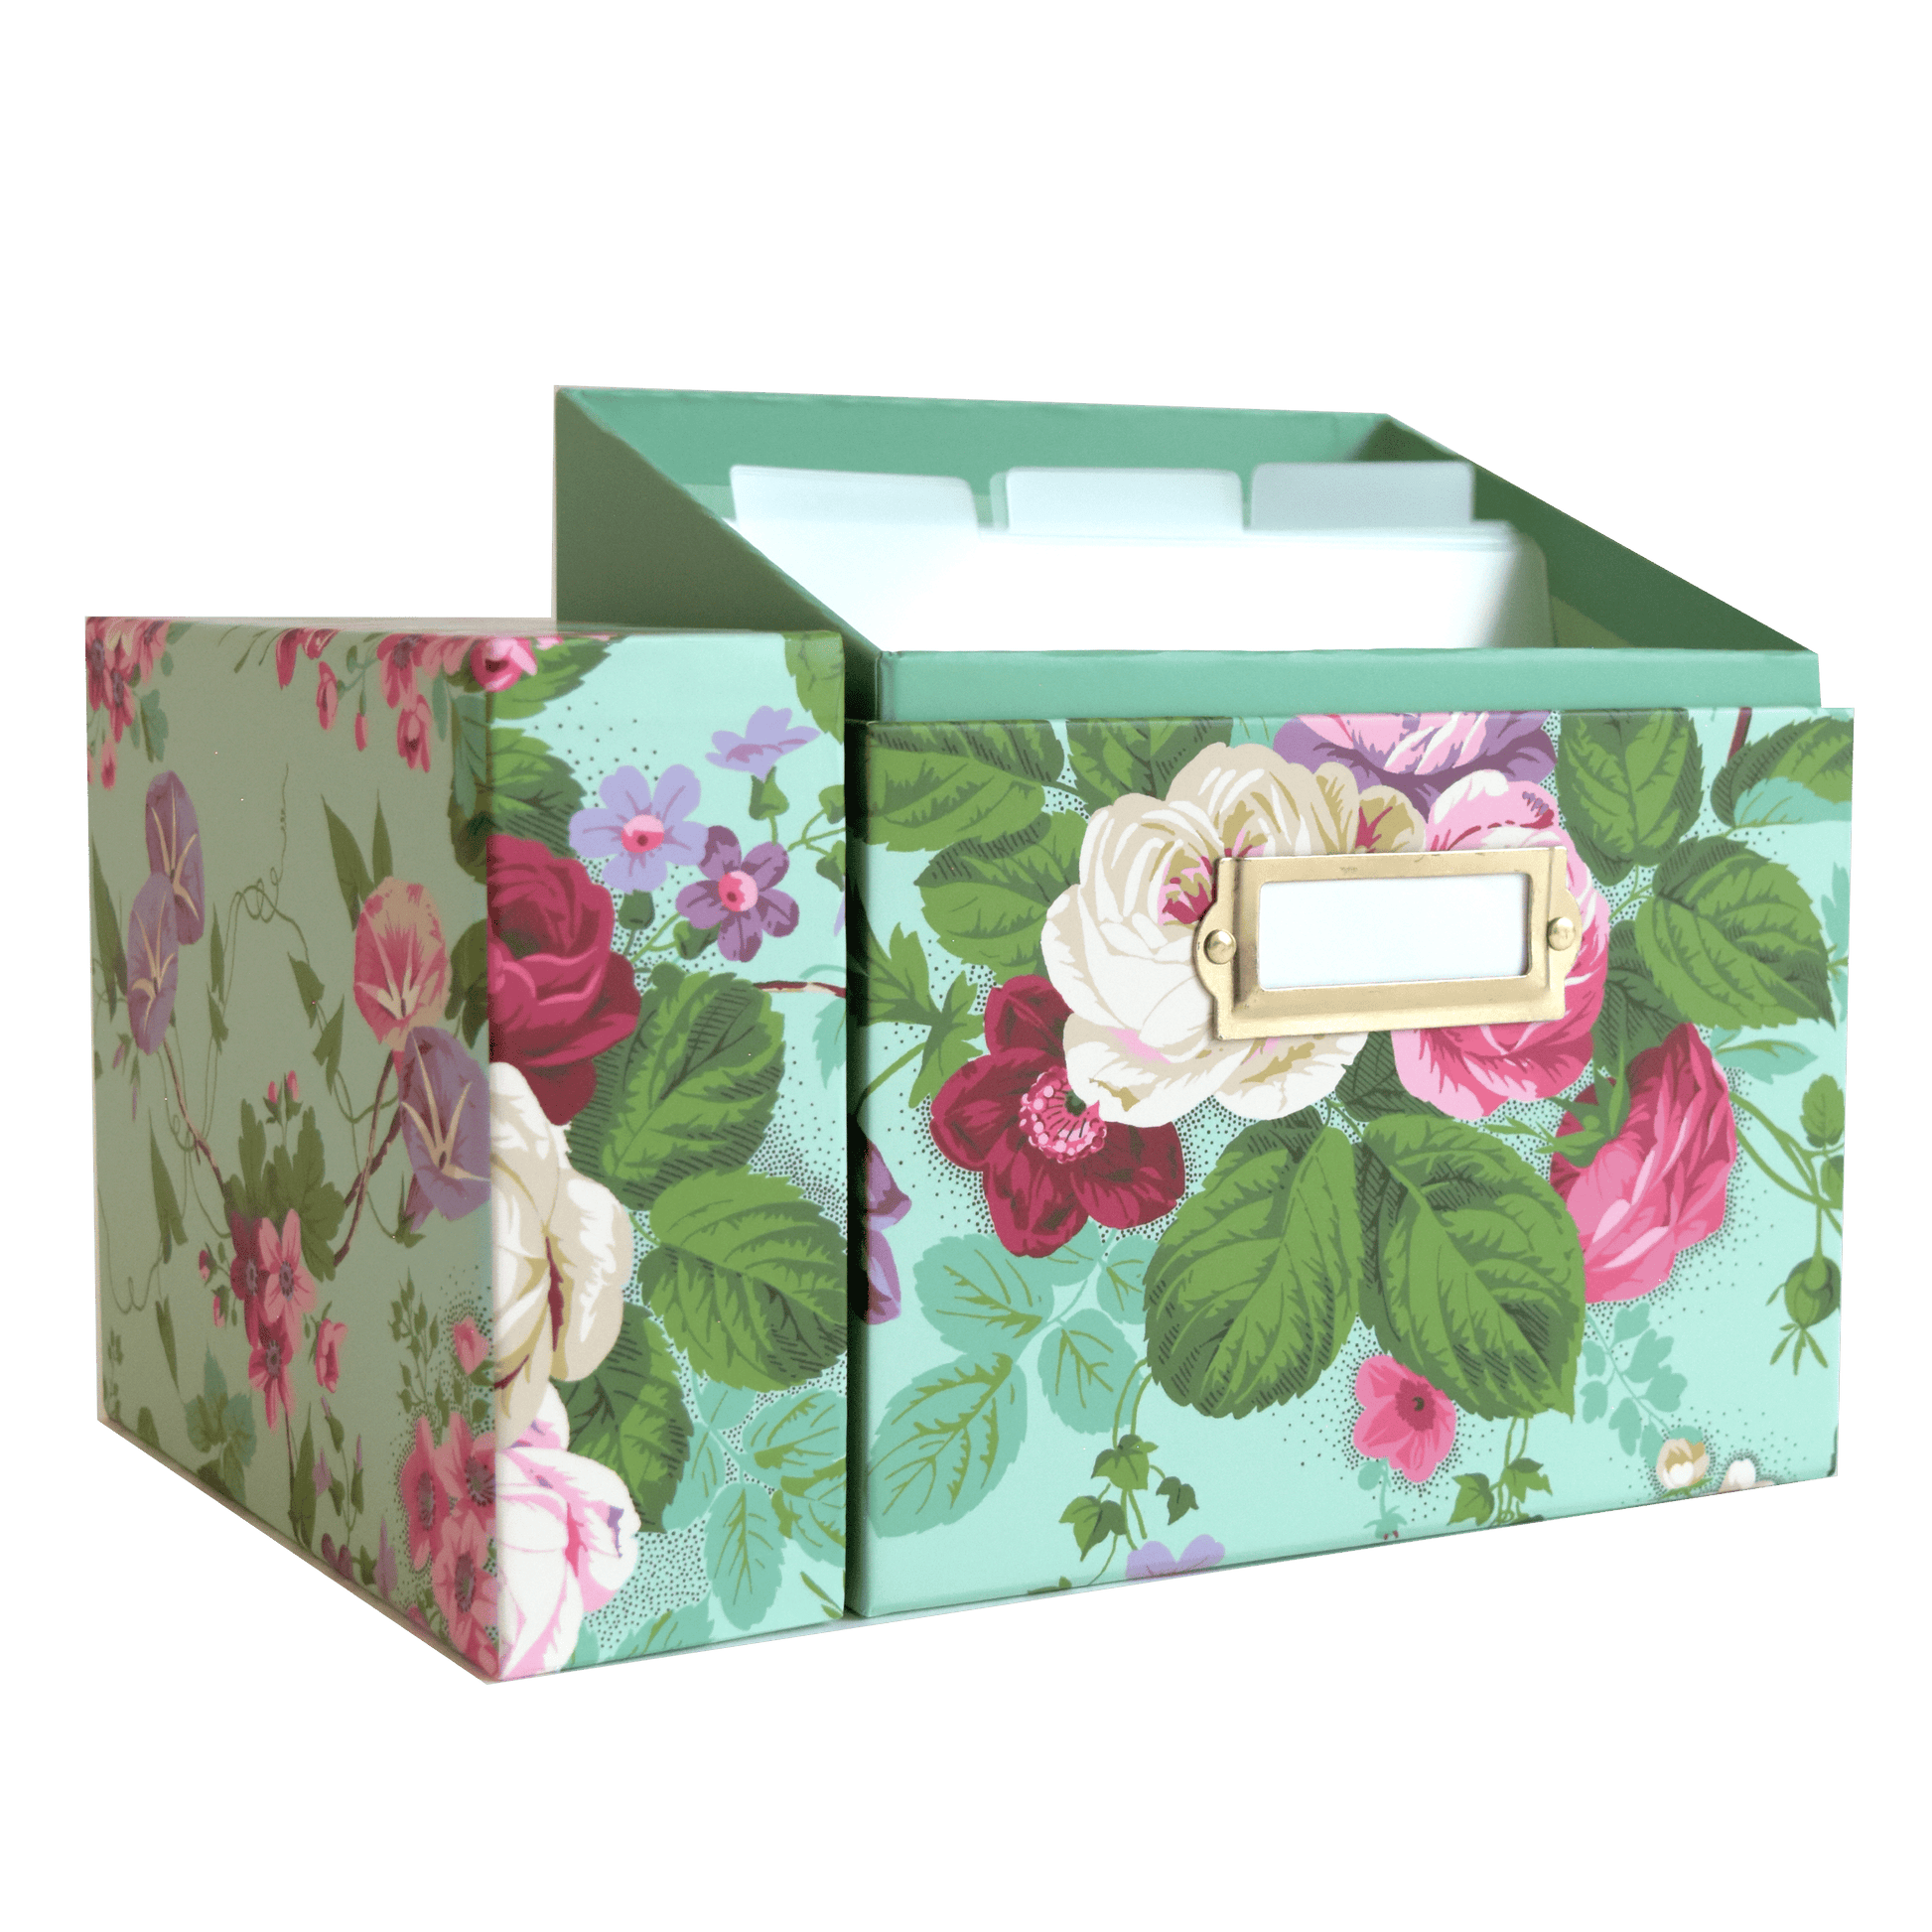 a flowered box with a name tag on it.